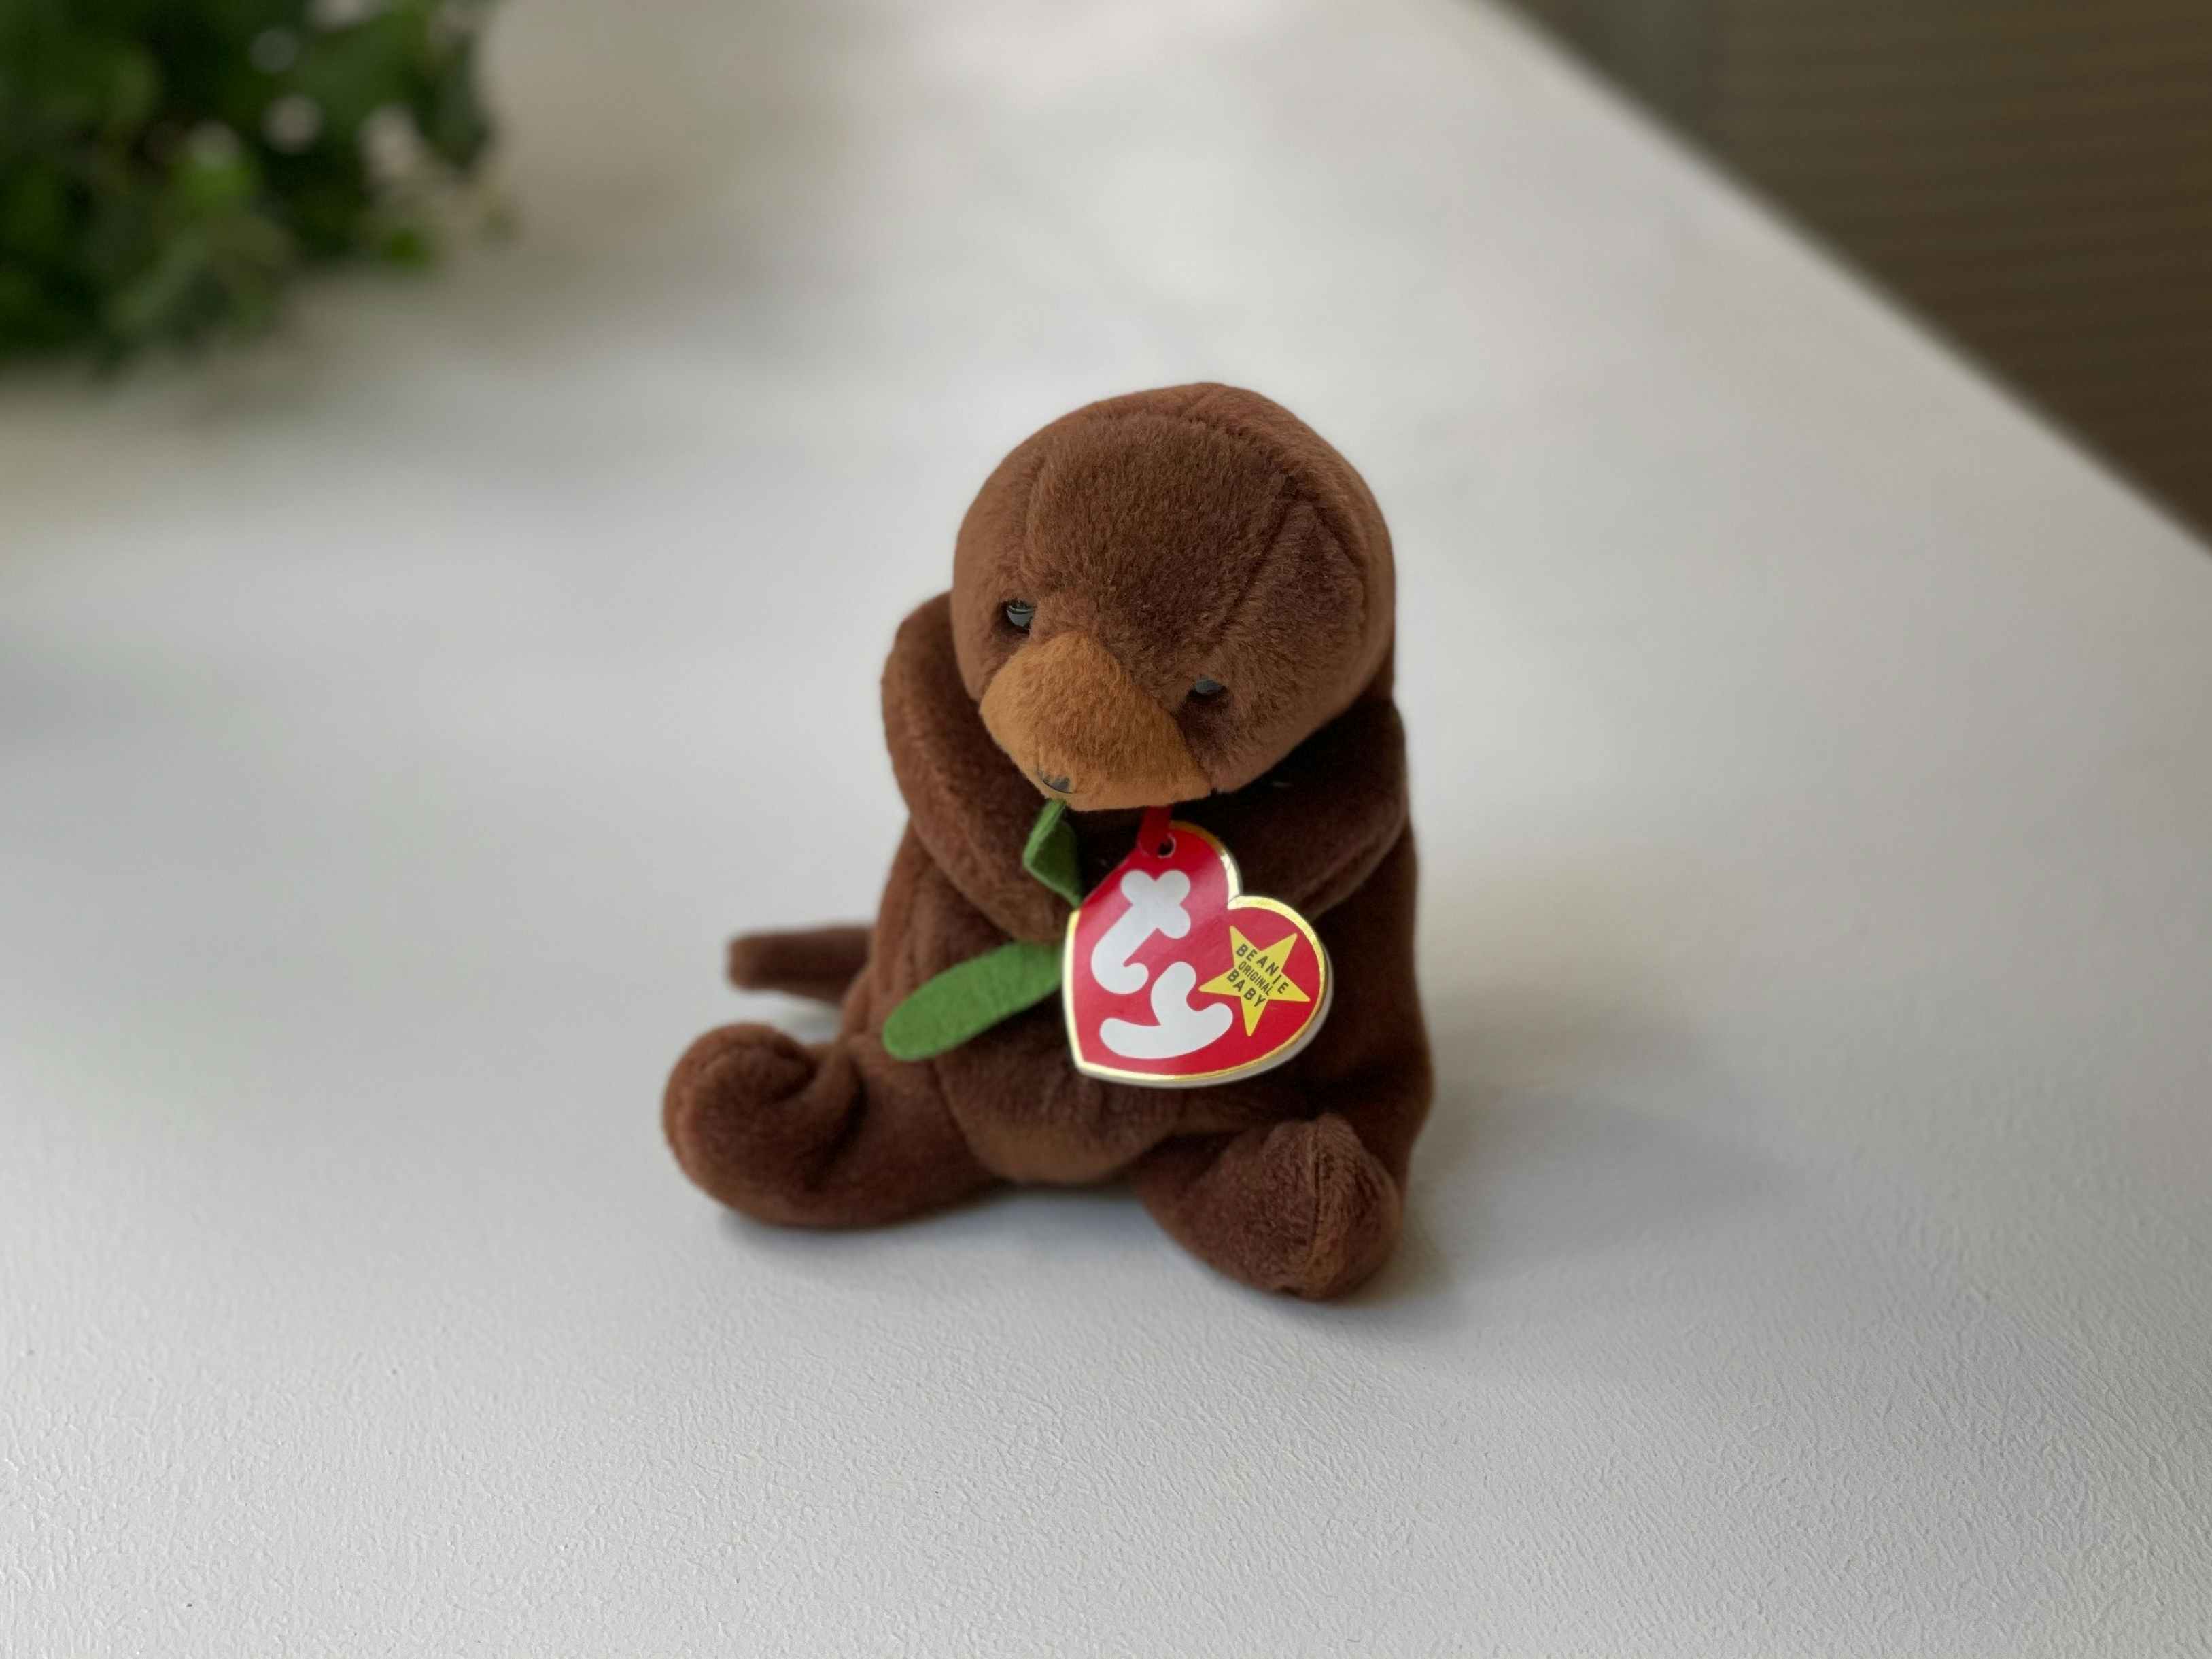 A Seaweed the Otter beanie baby sitting on a white table.